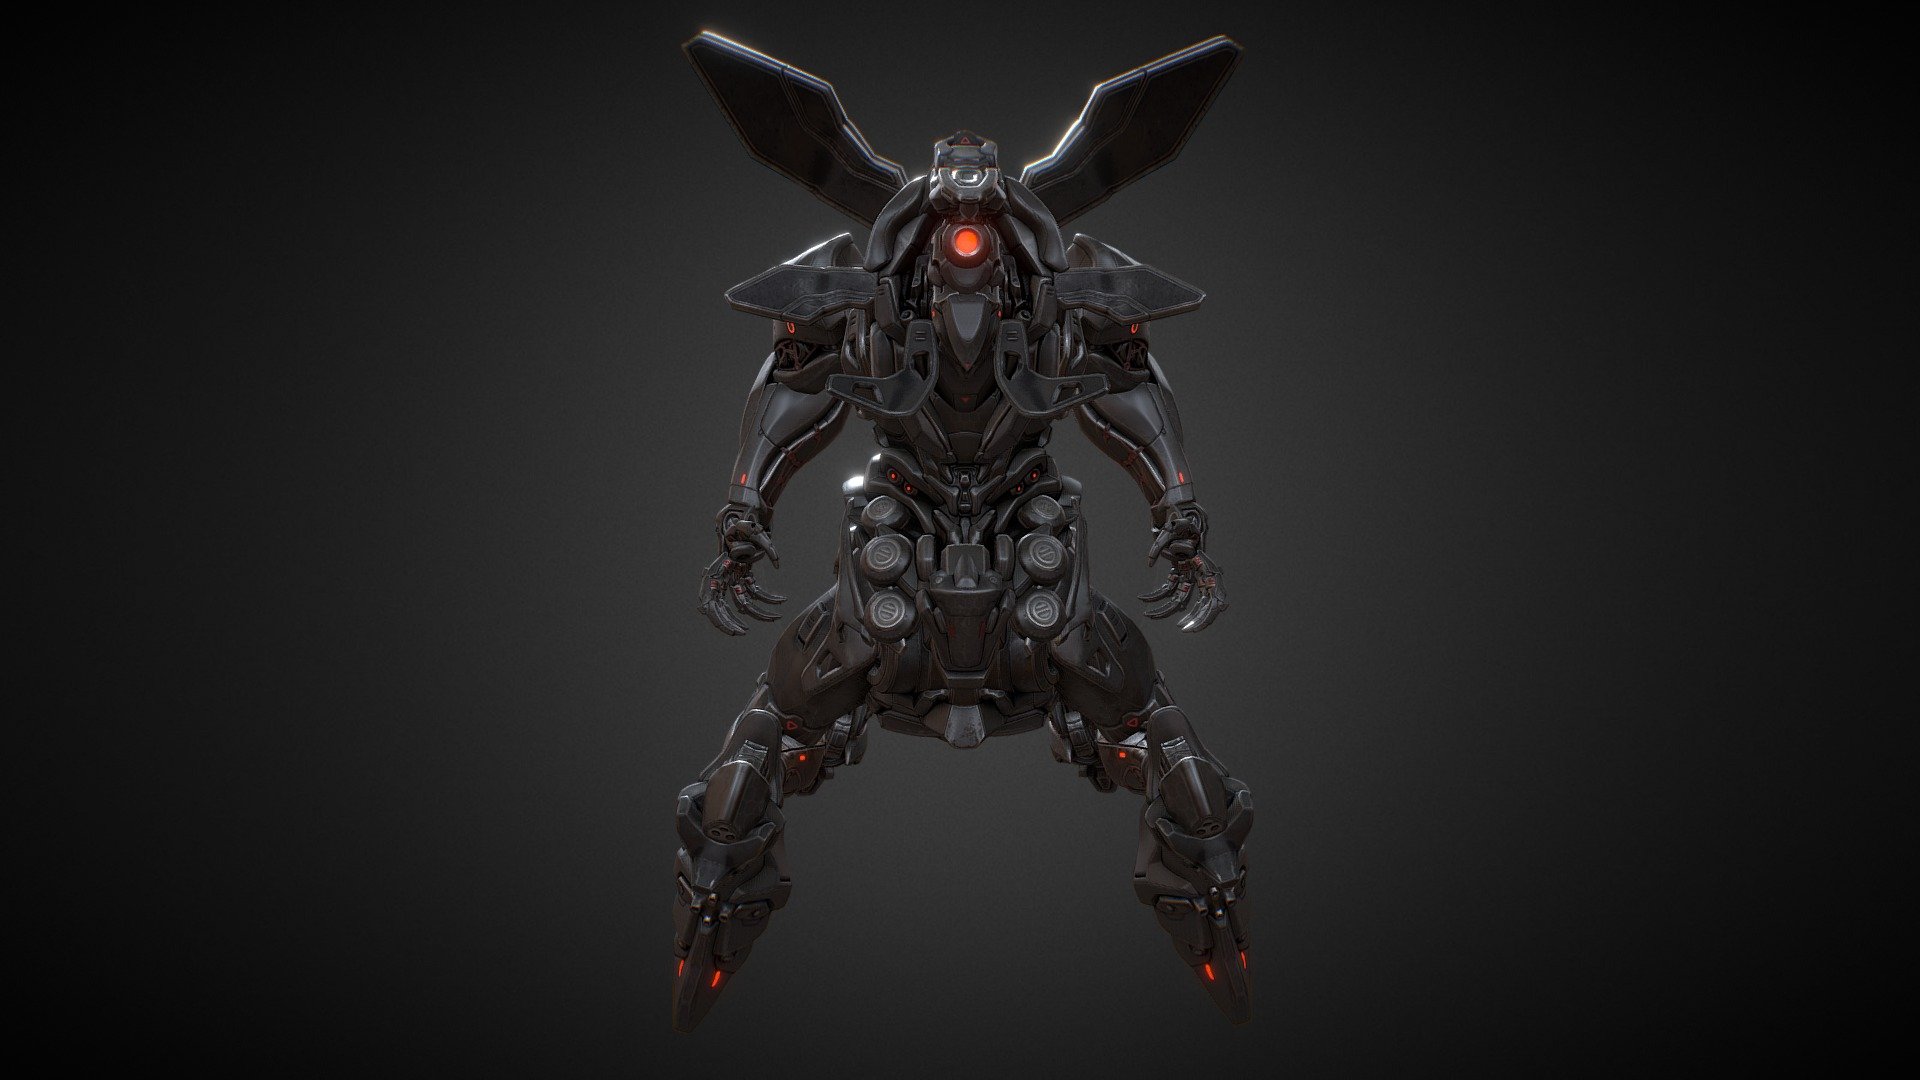 The Humnx Gorgon is largest experimental AI driven drone mech in production.  The secret weapon of Genesis base, this drone is designed to take out any mech in the USFF arsenal.  This mech was created as a concept enemy for PVE, may be implemented in the future.

https://archangelgame.com/ - Humnx Gorgon - 3D model by Archangel: Hellfire (@archangelgame) 3d model